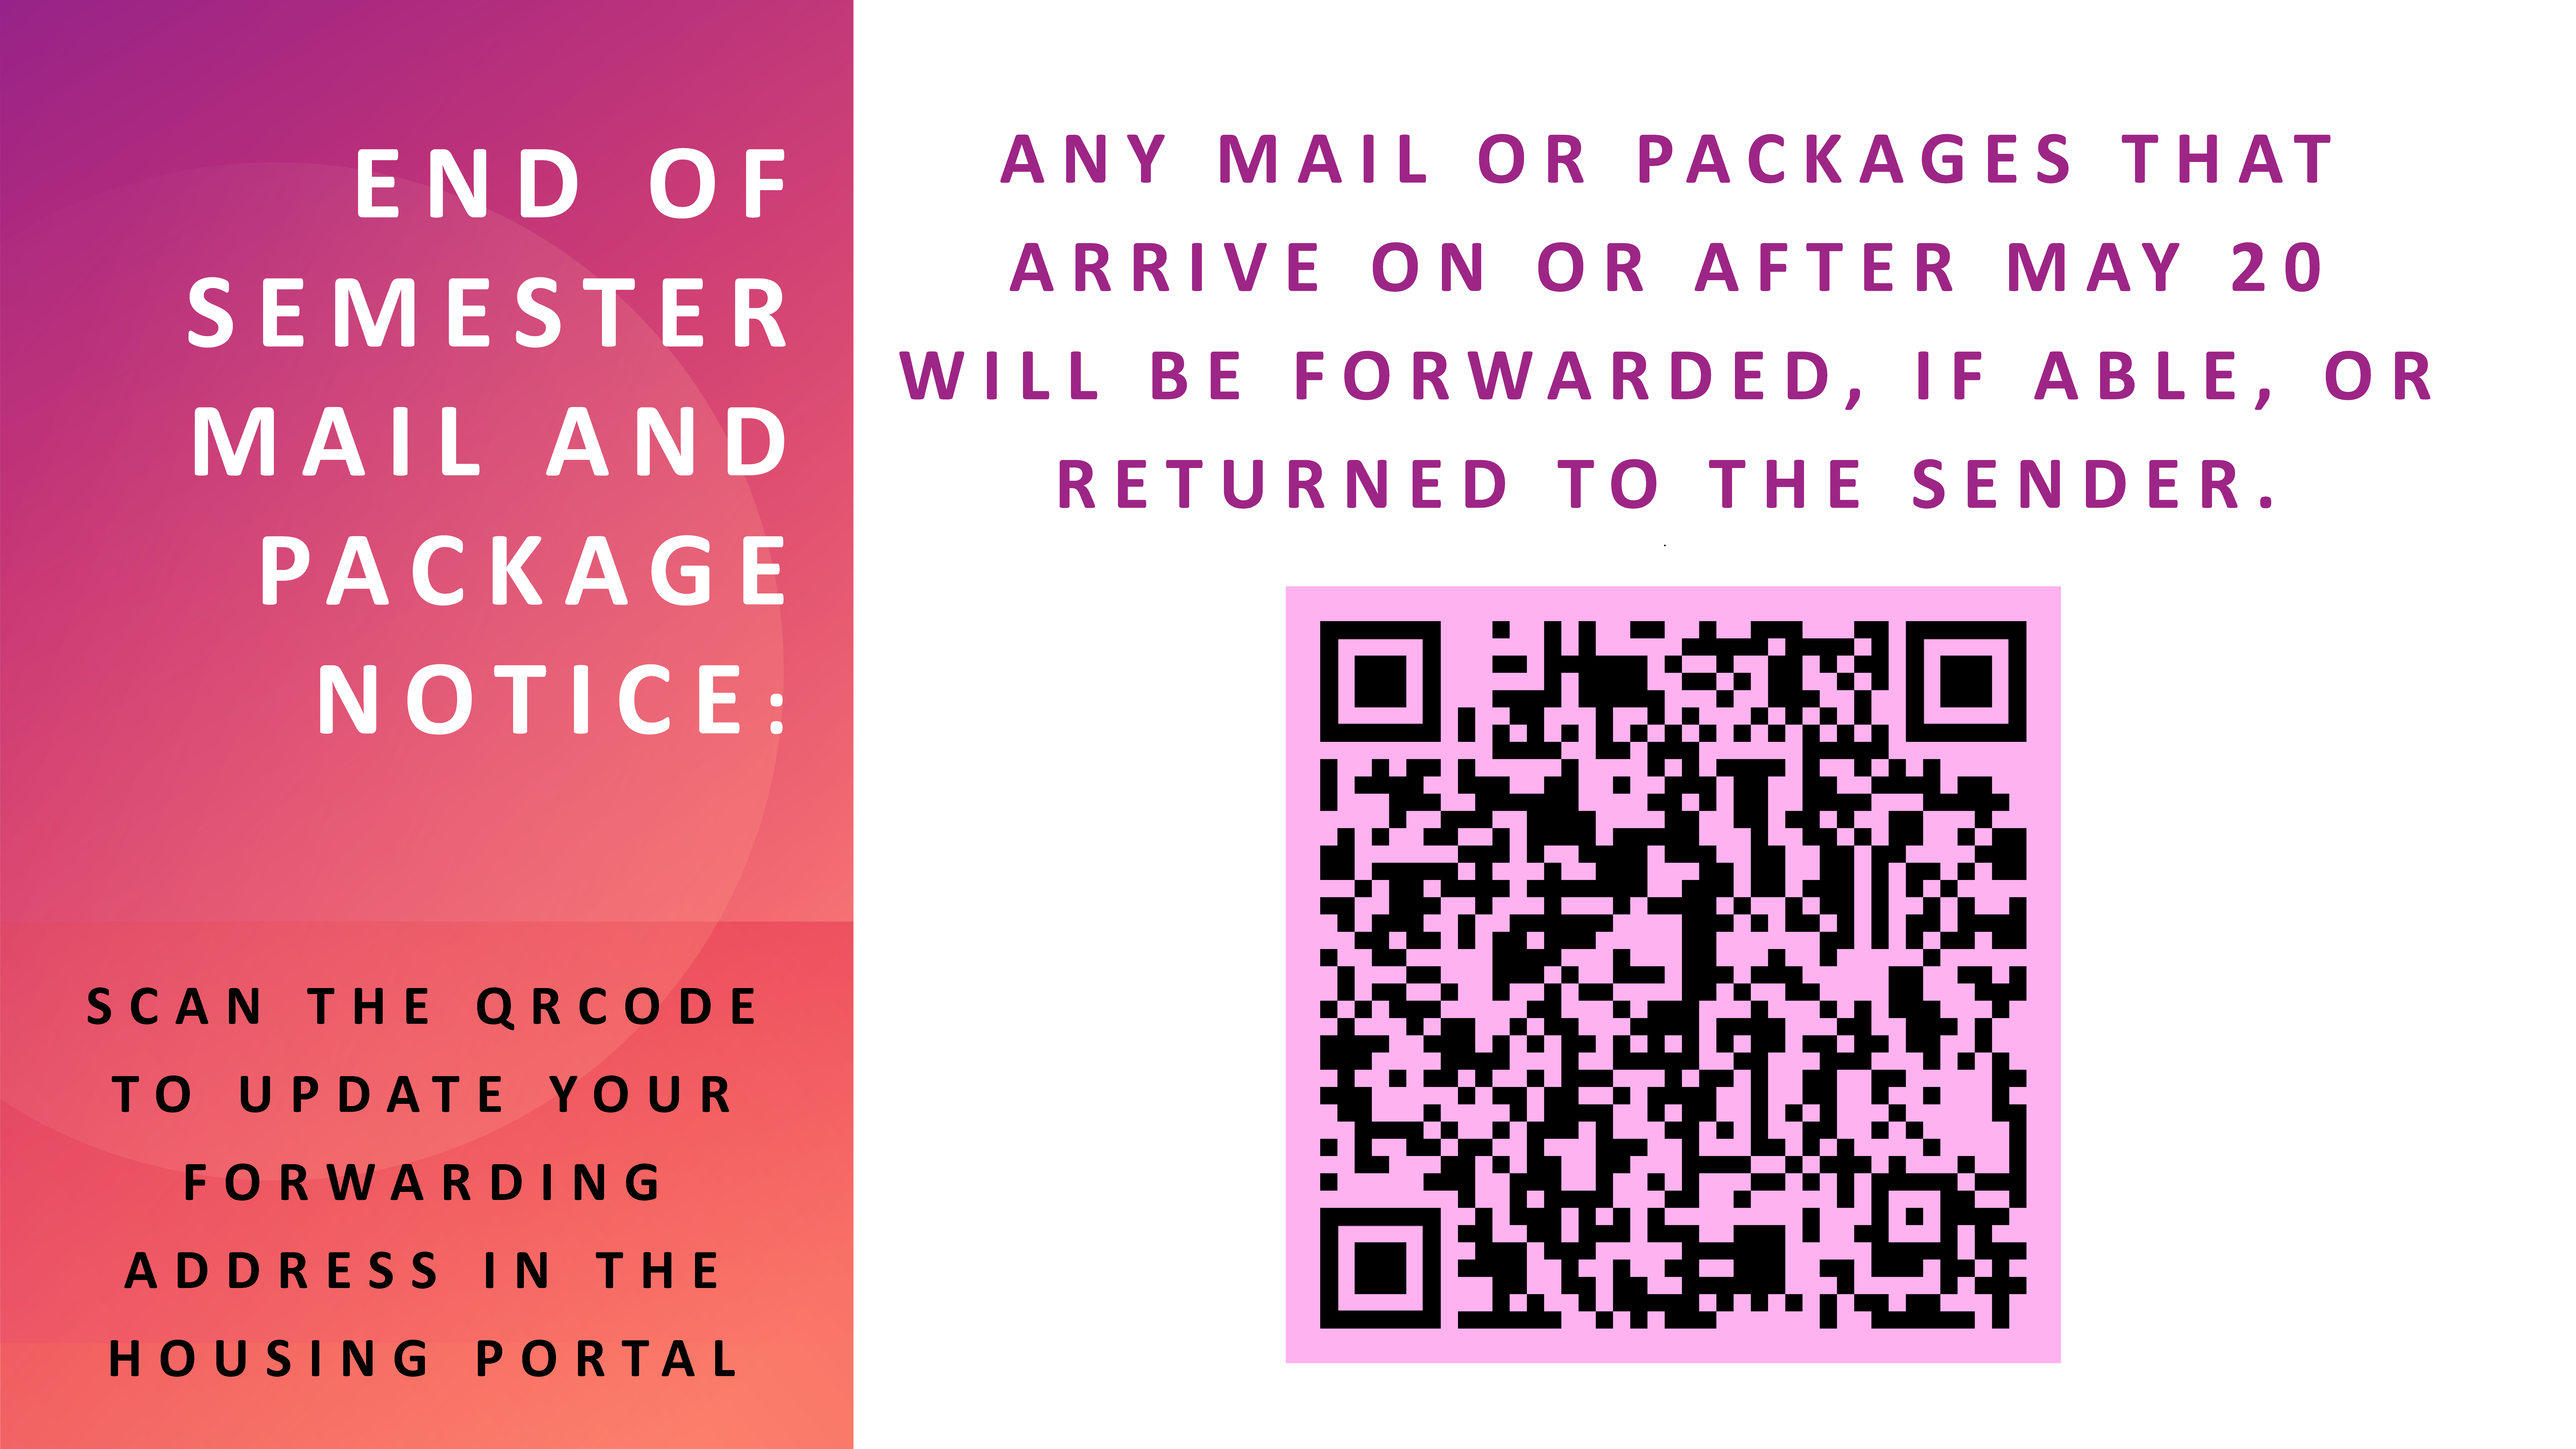 Any mail or packages that arrive on or after May 20 will be forwarded, if able, or returned to the sender. 